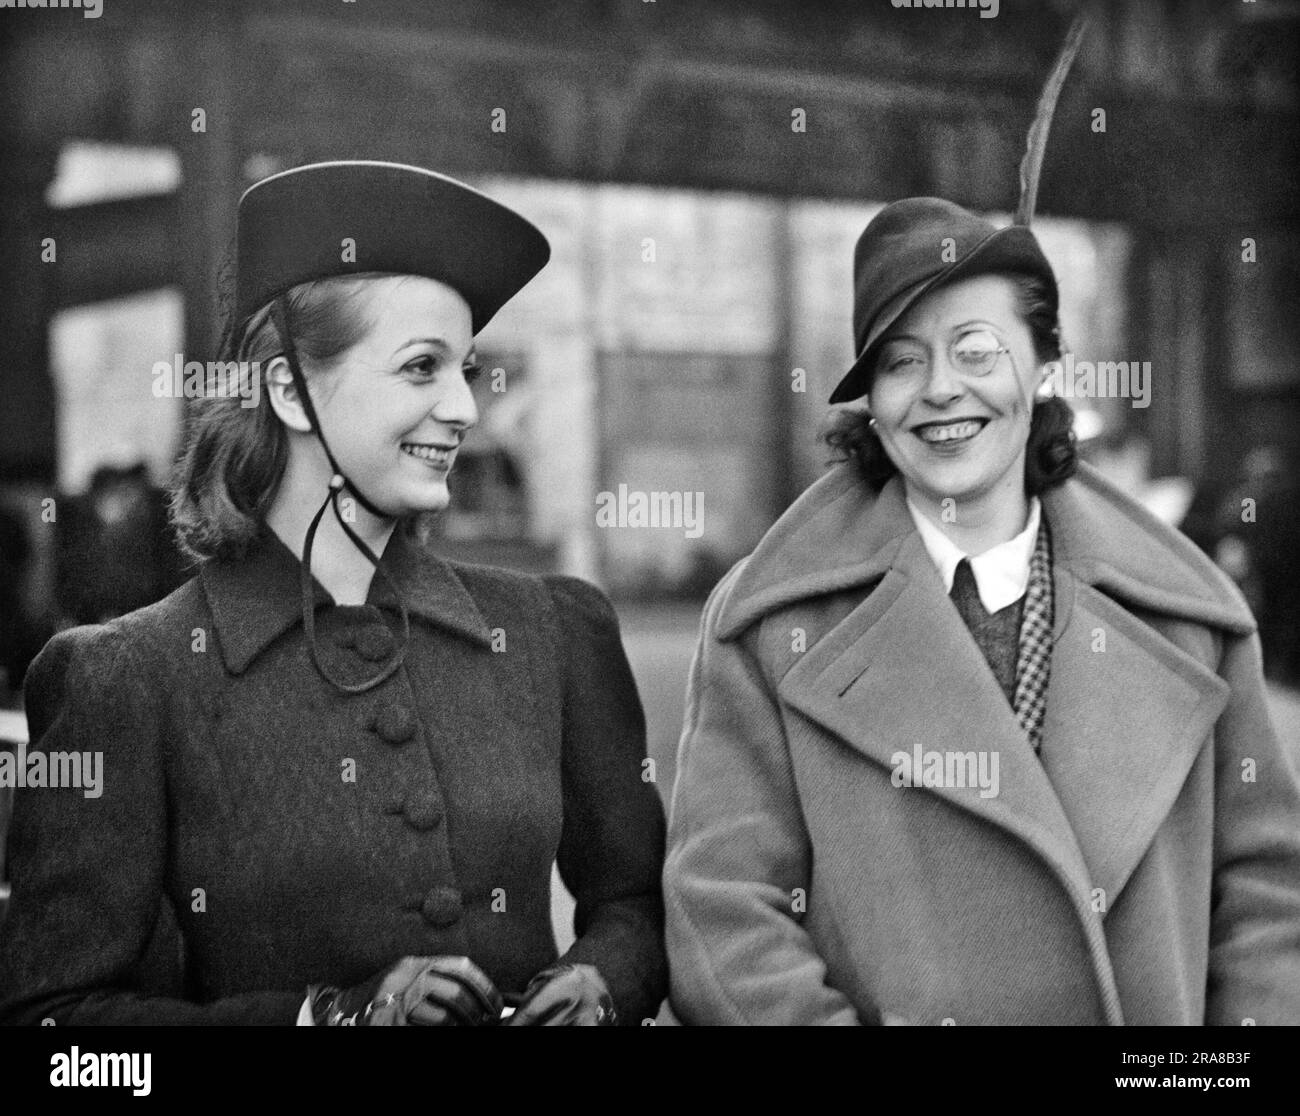 Plymouth, England:  March 19, 1938 Ballet Jooss members Herta Thiele (L) and Erika Hanka as they arrive on the liner 'Paris' from a successful tour of America. Stock Photo